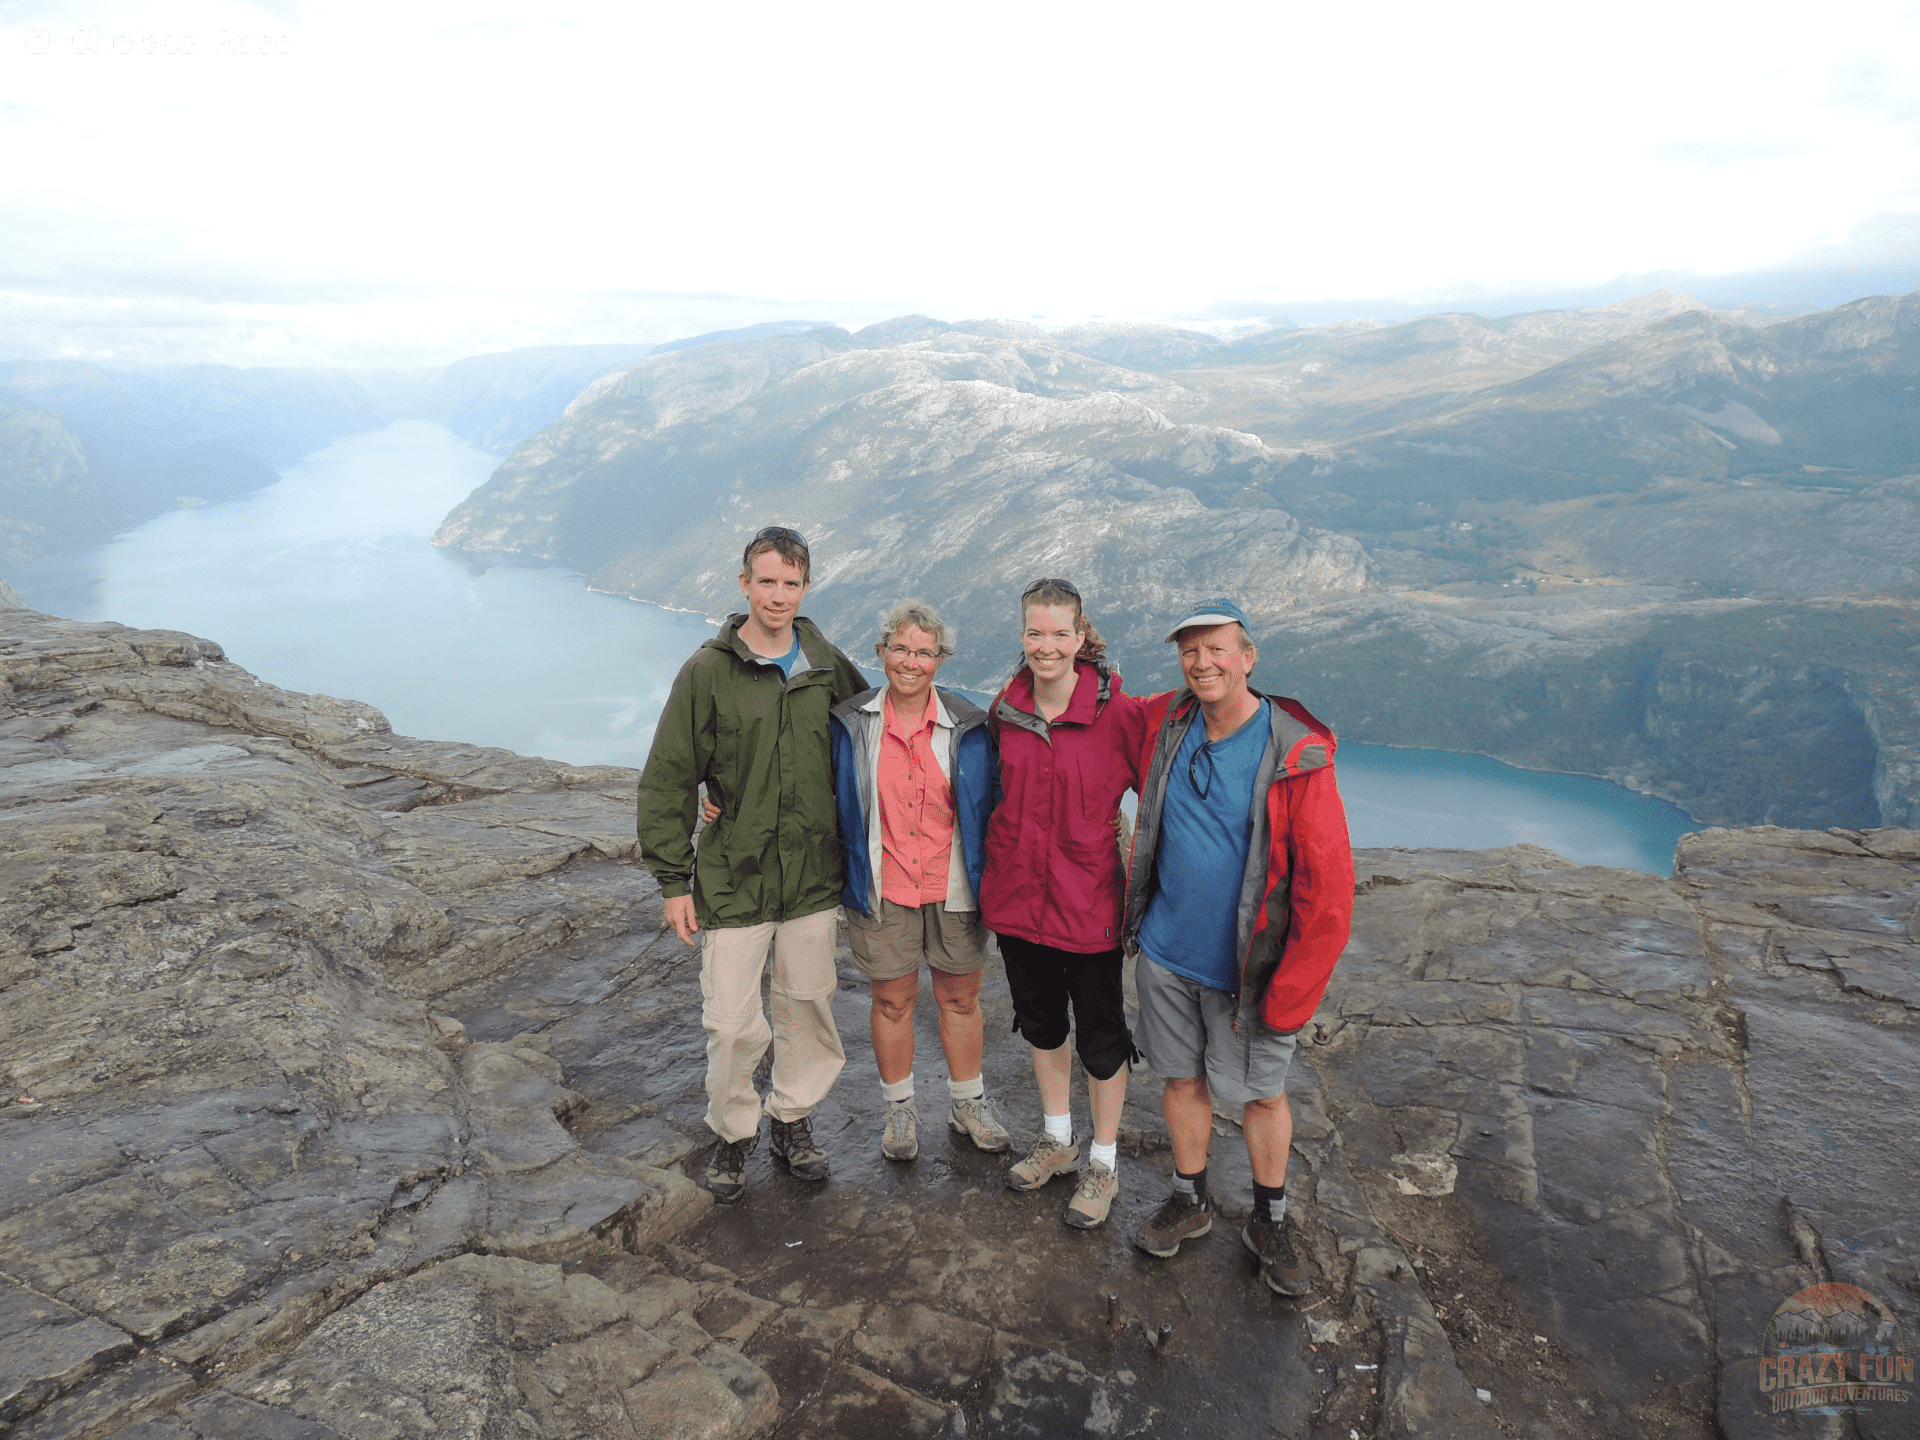 Presume outdoor competence in kids. This is a picture of my family and I on Preikestolen in Norway.